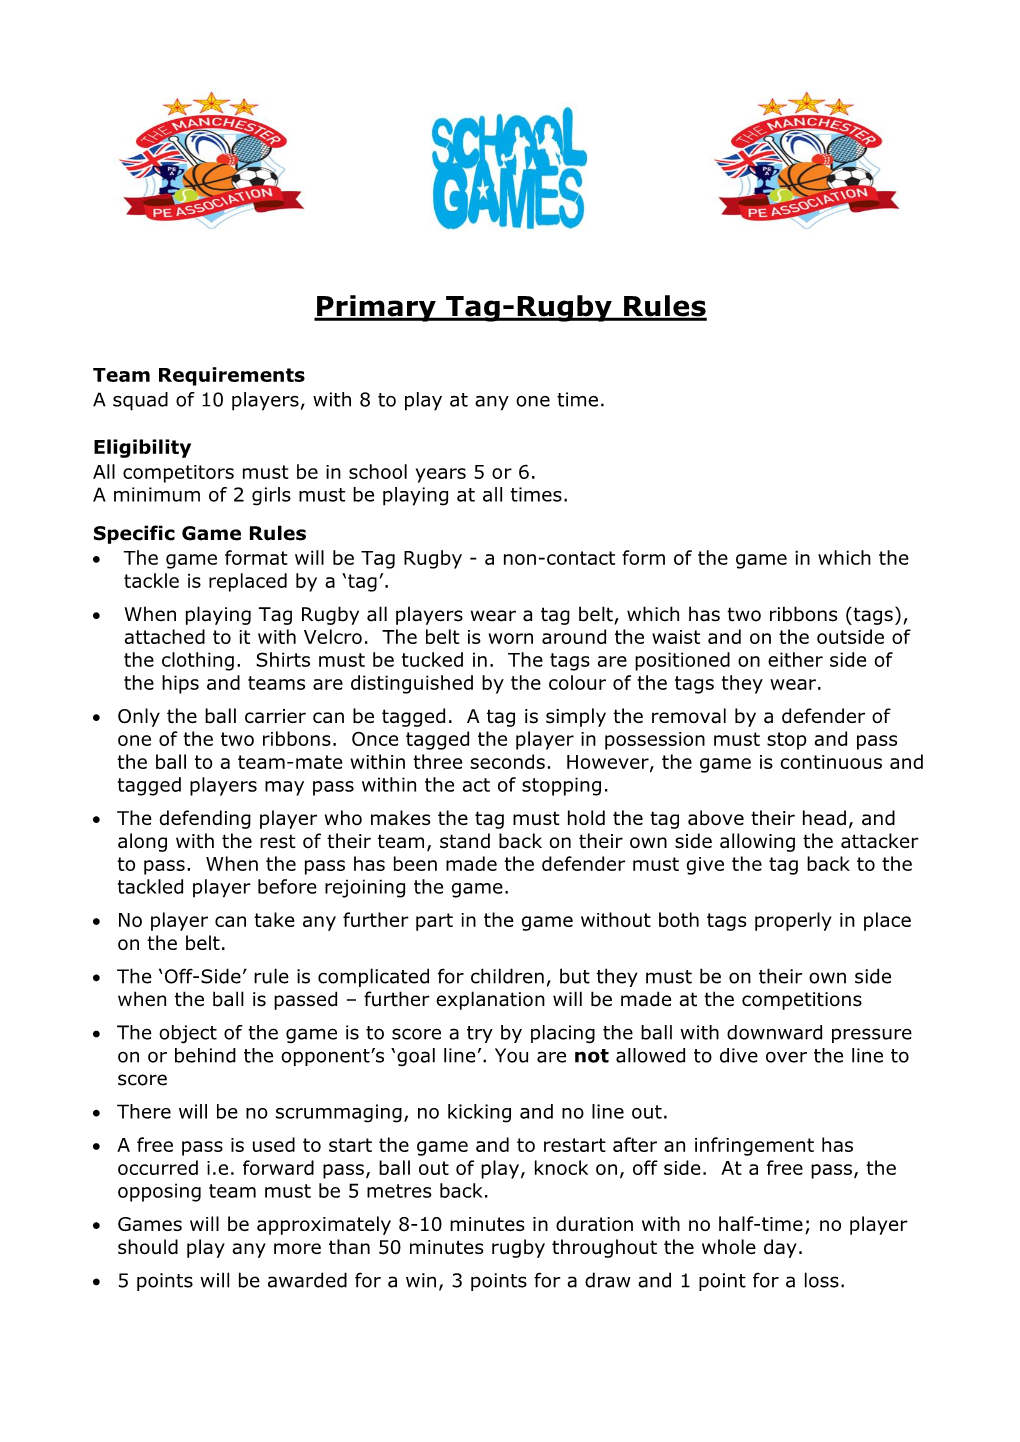 Primary Tag-Rugby Rules